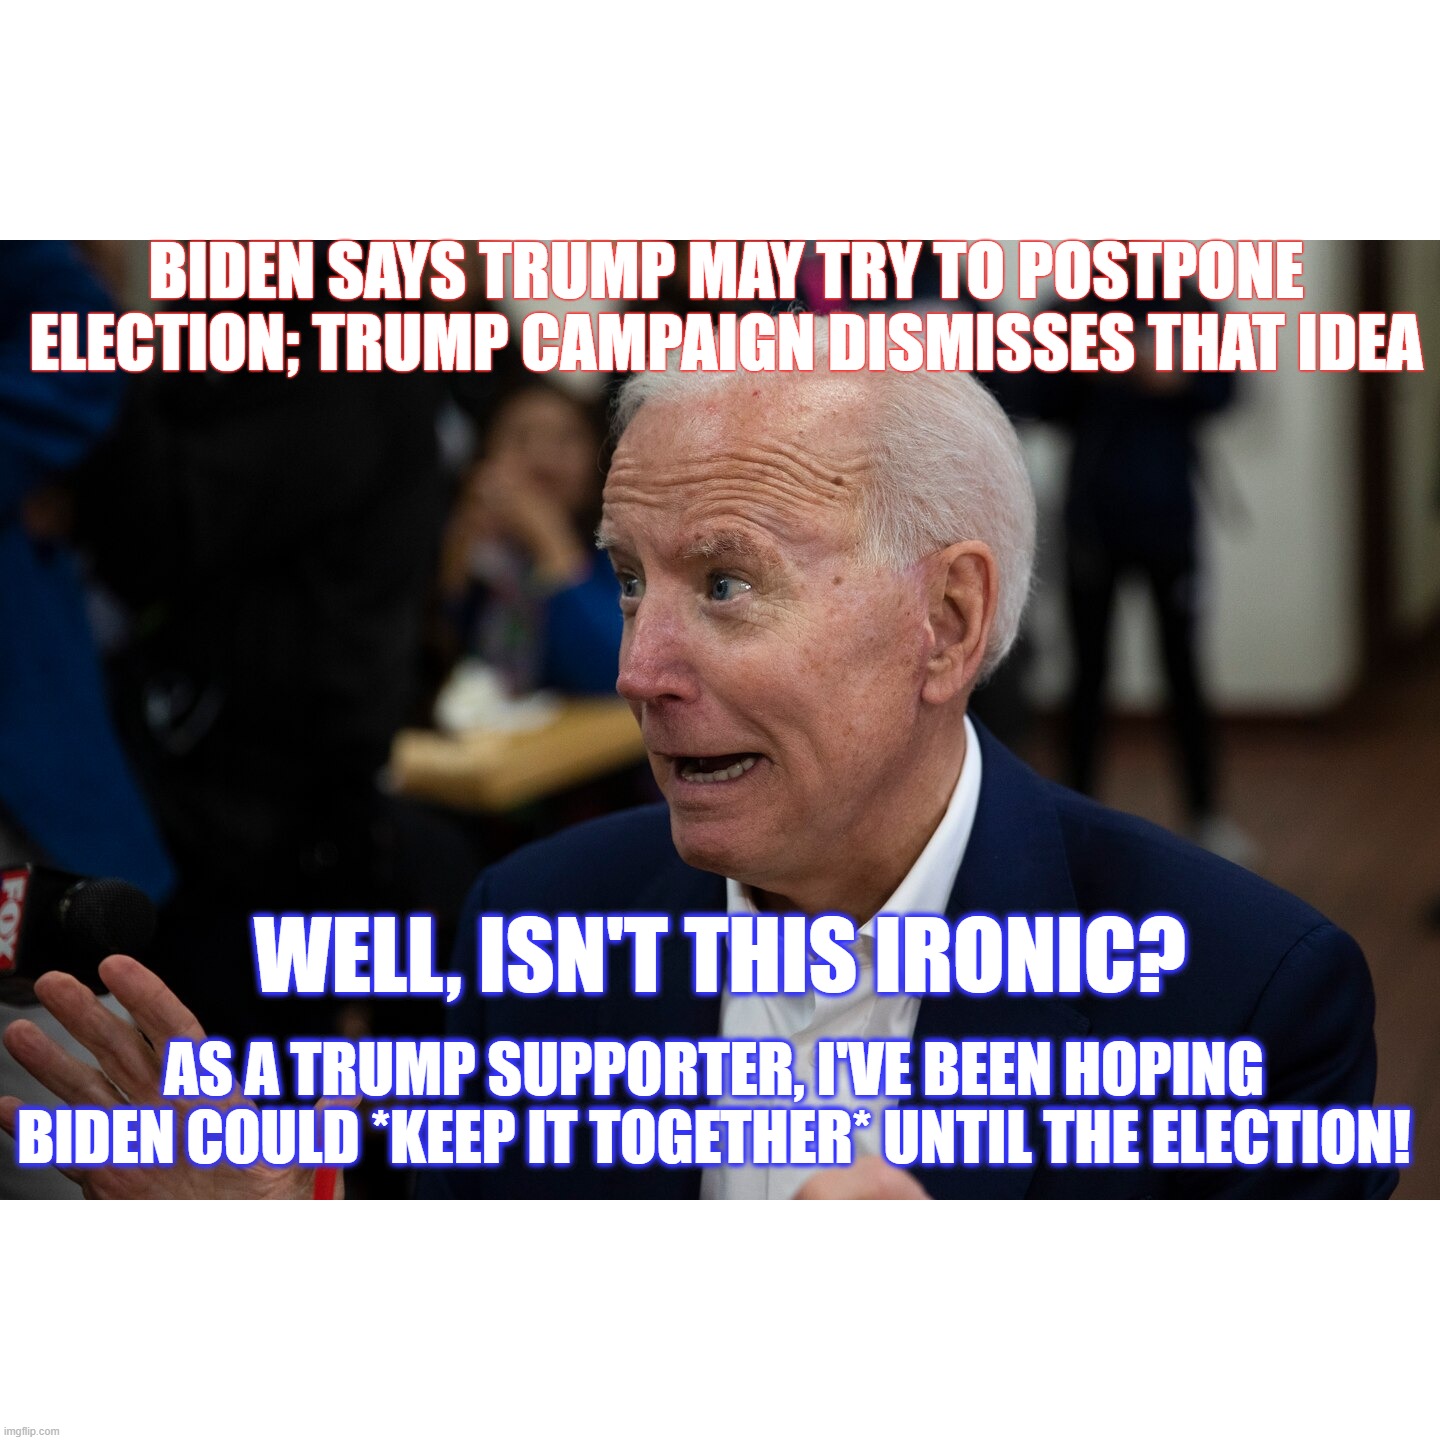 Poor Demented Joe... trying to stay relevant in the age of tha 'Rona | BIDEN SAYS TRUMP MAY TRY TO POSTPONE ELECTION; TRUMP CAMPAIGN DISMISSES THAT IDEA; WELL, ISN'T THIS IRONIC? AS A TRUMP SUPPORTER, I'VE BEEN HOPING BIDEN COULD *KEEP IT TOGETHER* UNTIL THE ELECTION! | image tagged in biden dementia,biden irrelevant,trump 2020 | made w/ Imgflip meme maker